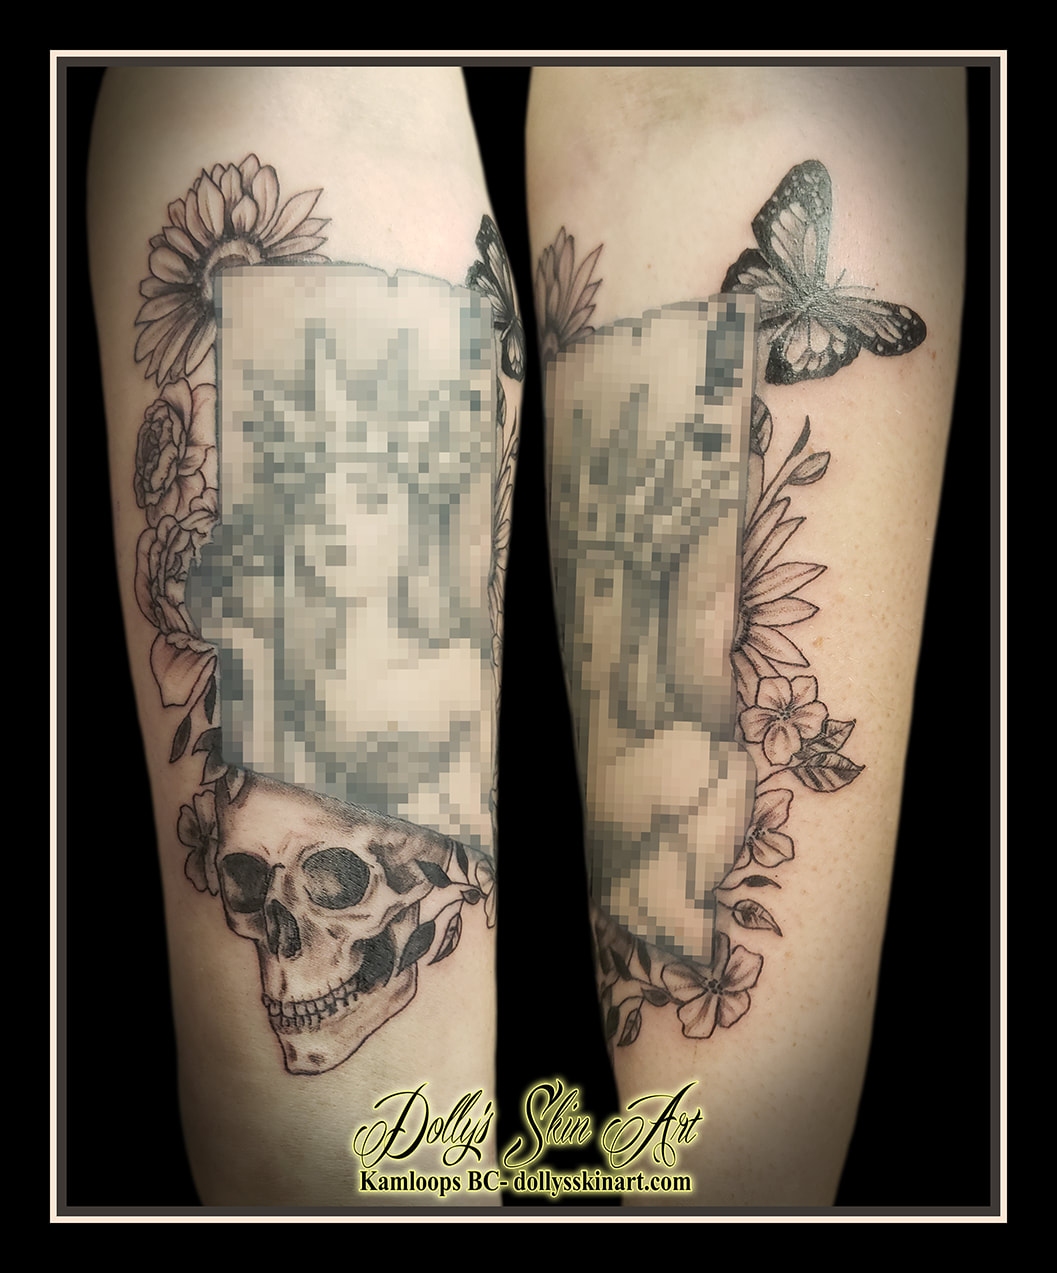 flowers skull butterfly tattoo black and grey linework arm shading tattoo dolly's skin art kamloops